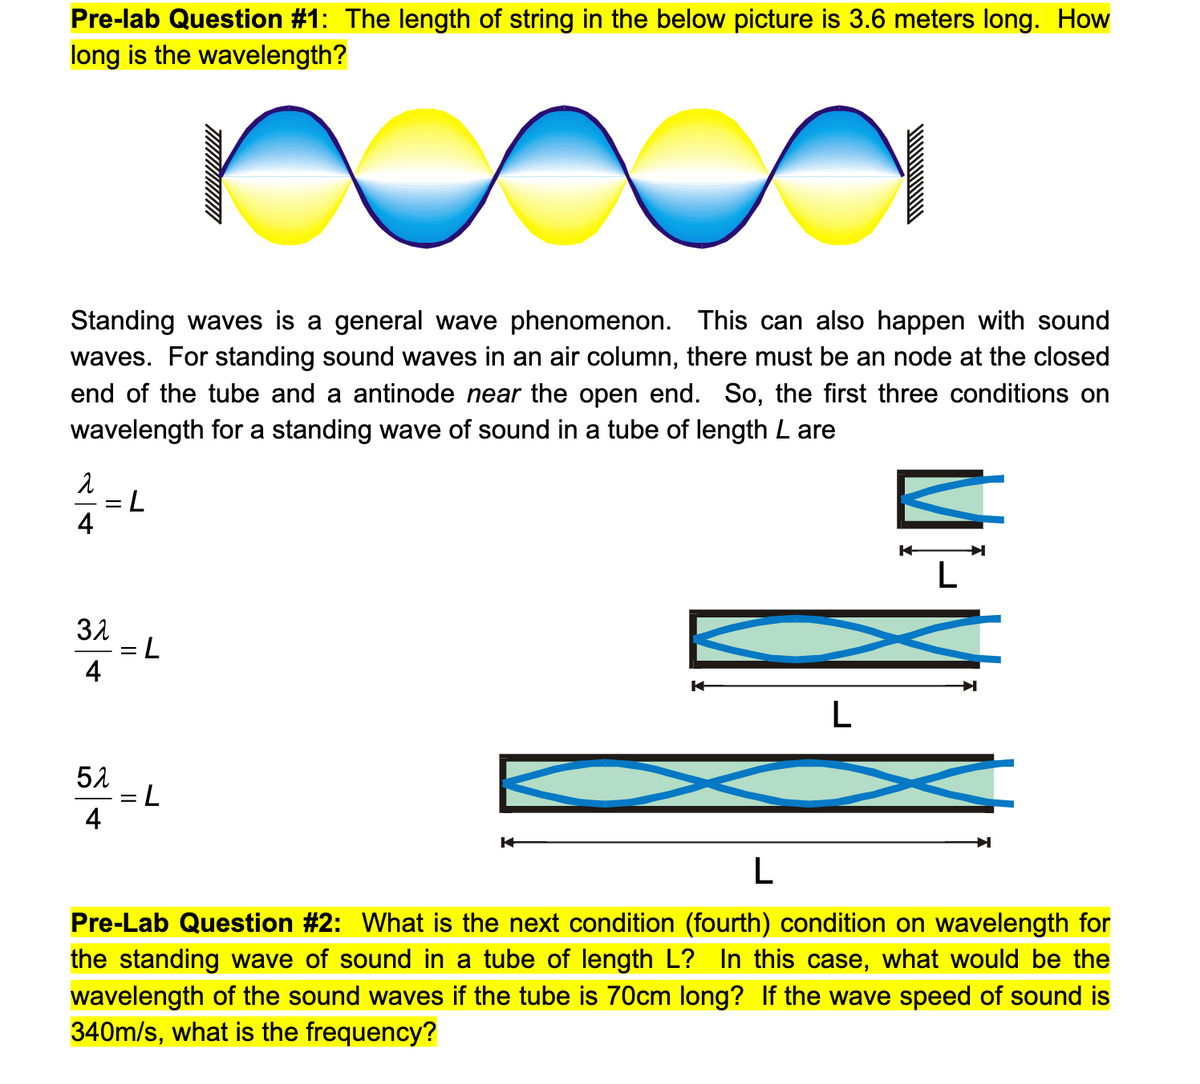 Pre-lab Question #1: The length of string in the below picture is 3.6 meters long. How
long is the wavelength?
Standing waves is a general wave phenomenon. This can also happen with sound
waves. For standing sound waves in an air column, there must be an node at the closed
end of the tube and a antinode near the open end. So, the first three conditions on
wavelength for a standing wave of sound in a tube of length L are
7:
31
= L
4
L
51
4
L
Pre-Lab Question #2: What is the next condition (fourth) condition on wavelength for
the standing wave of sound in a tube of length L? In this case, what would be the
wavelength of the sound waves if the tube is 70cm long? If the wave speed of sound is
340m/s, what is the frequency?
2/4
